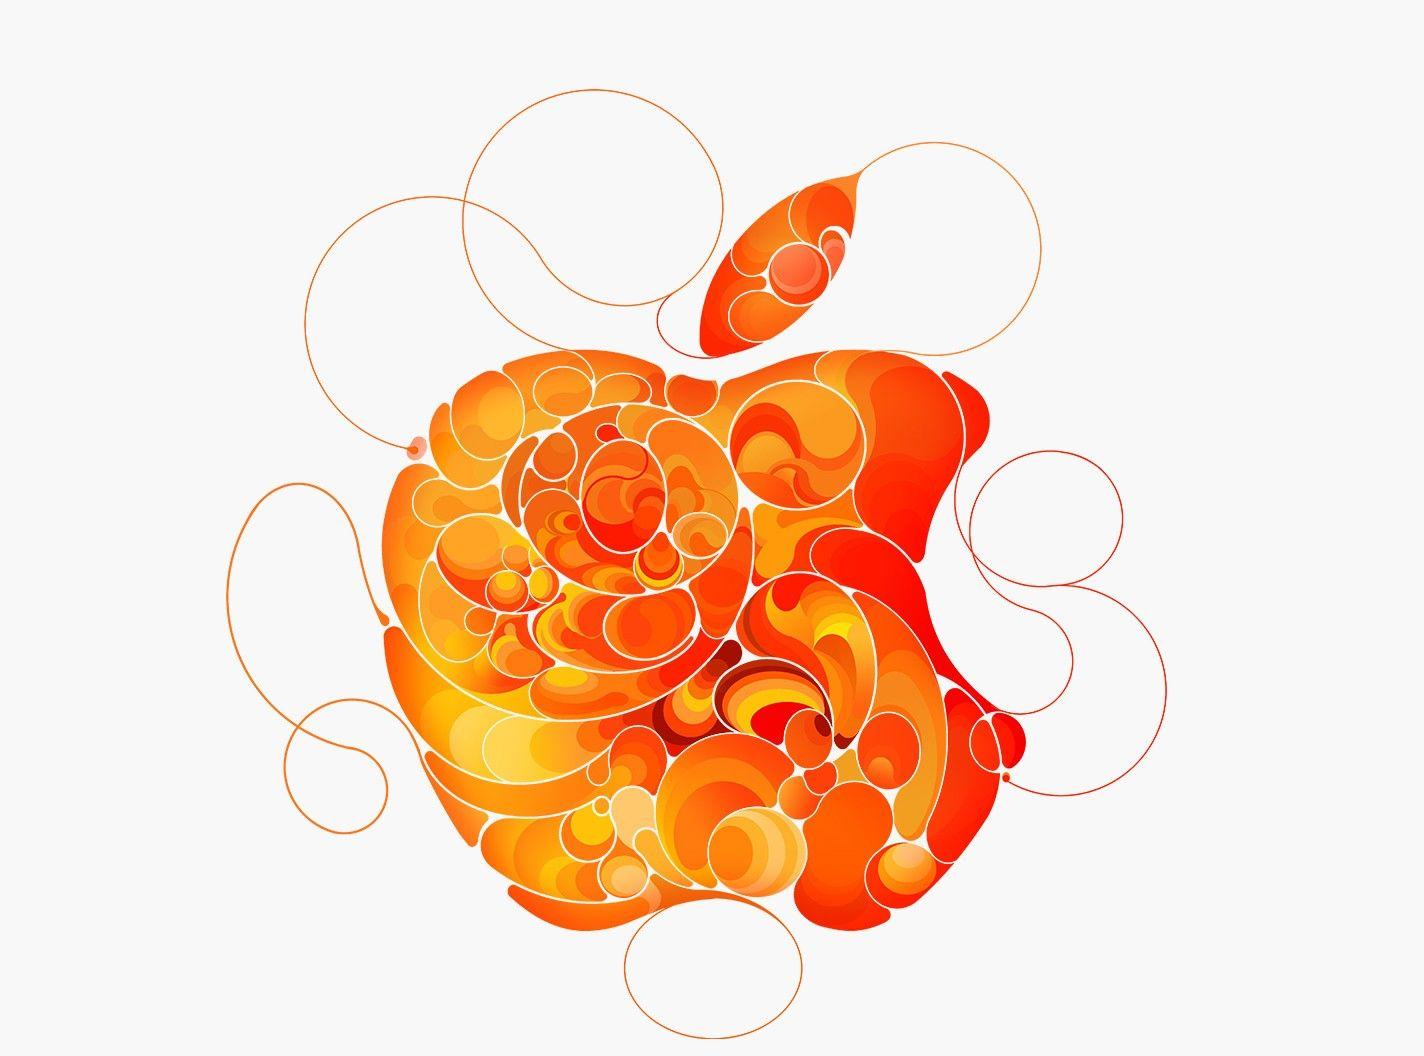 2018 Apple Logo - Apple October 2018 Event Preview: What's next for iPad Pro and Mac ...